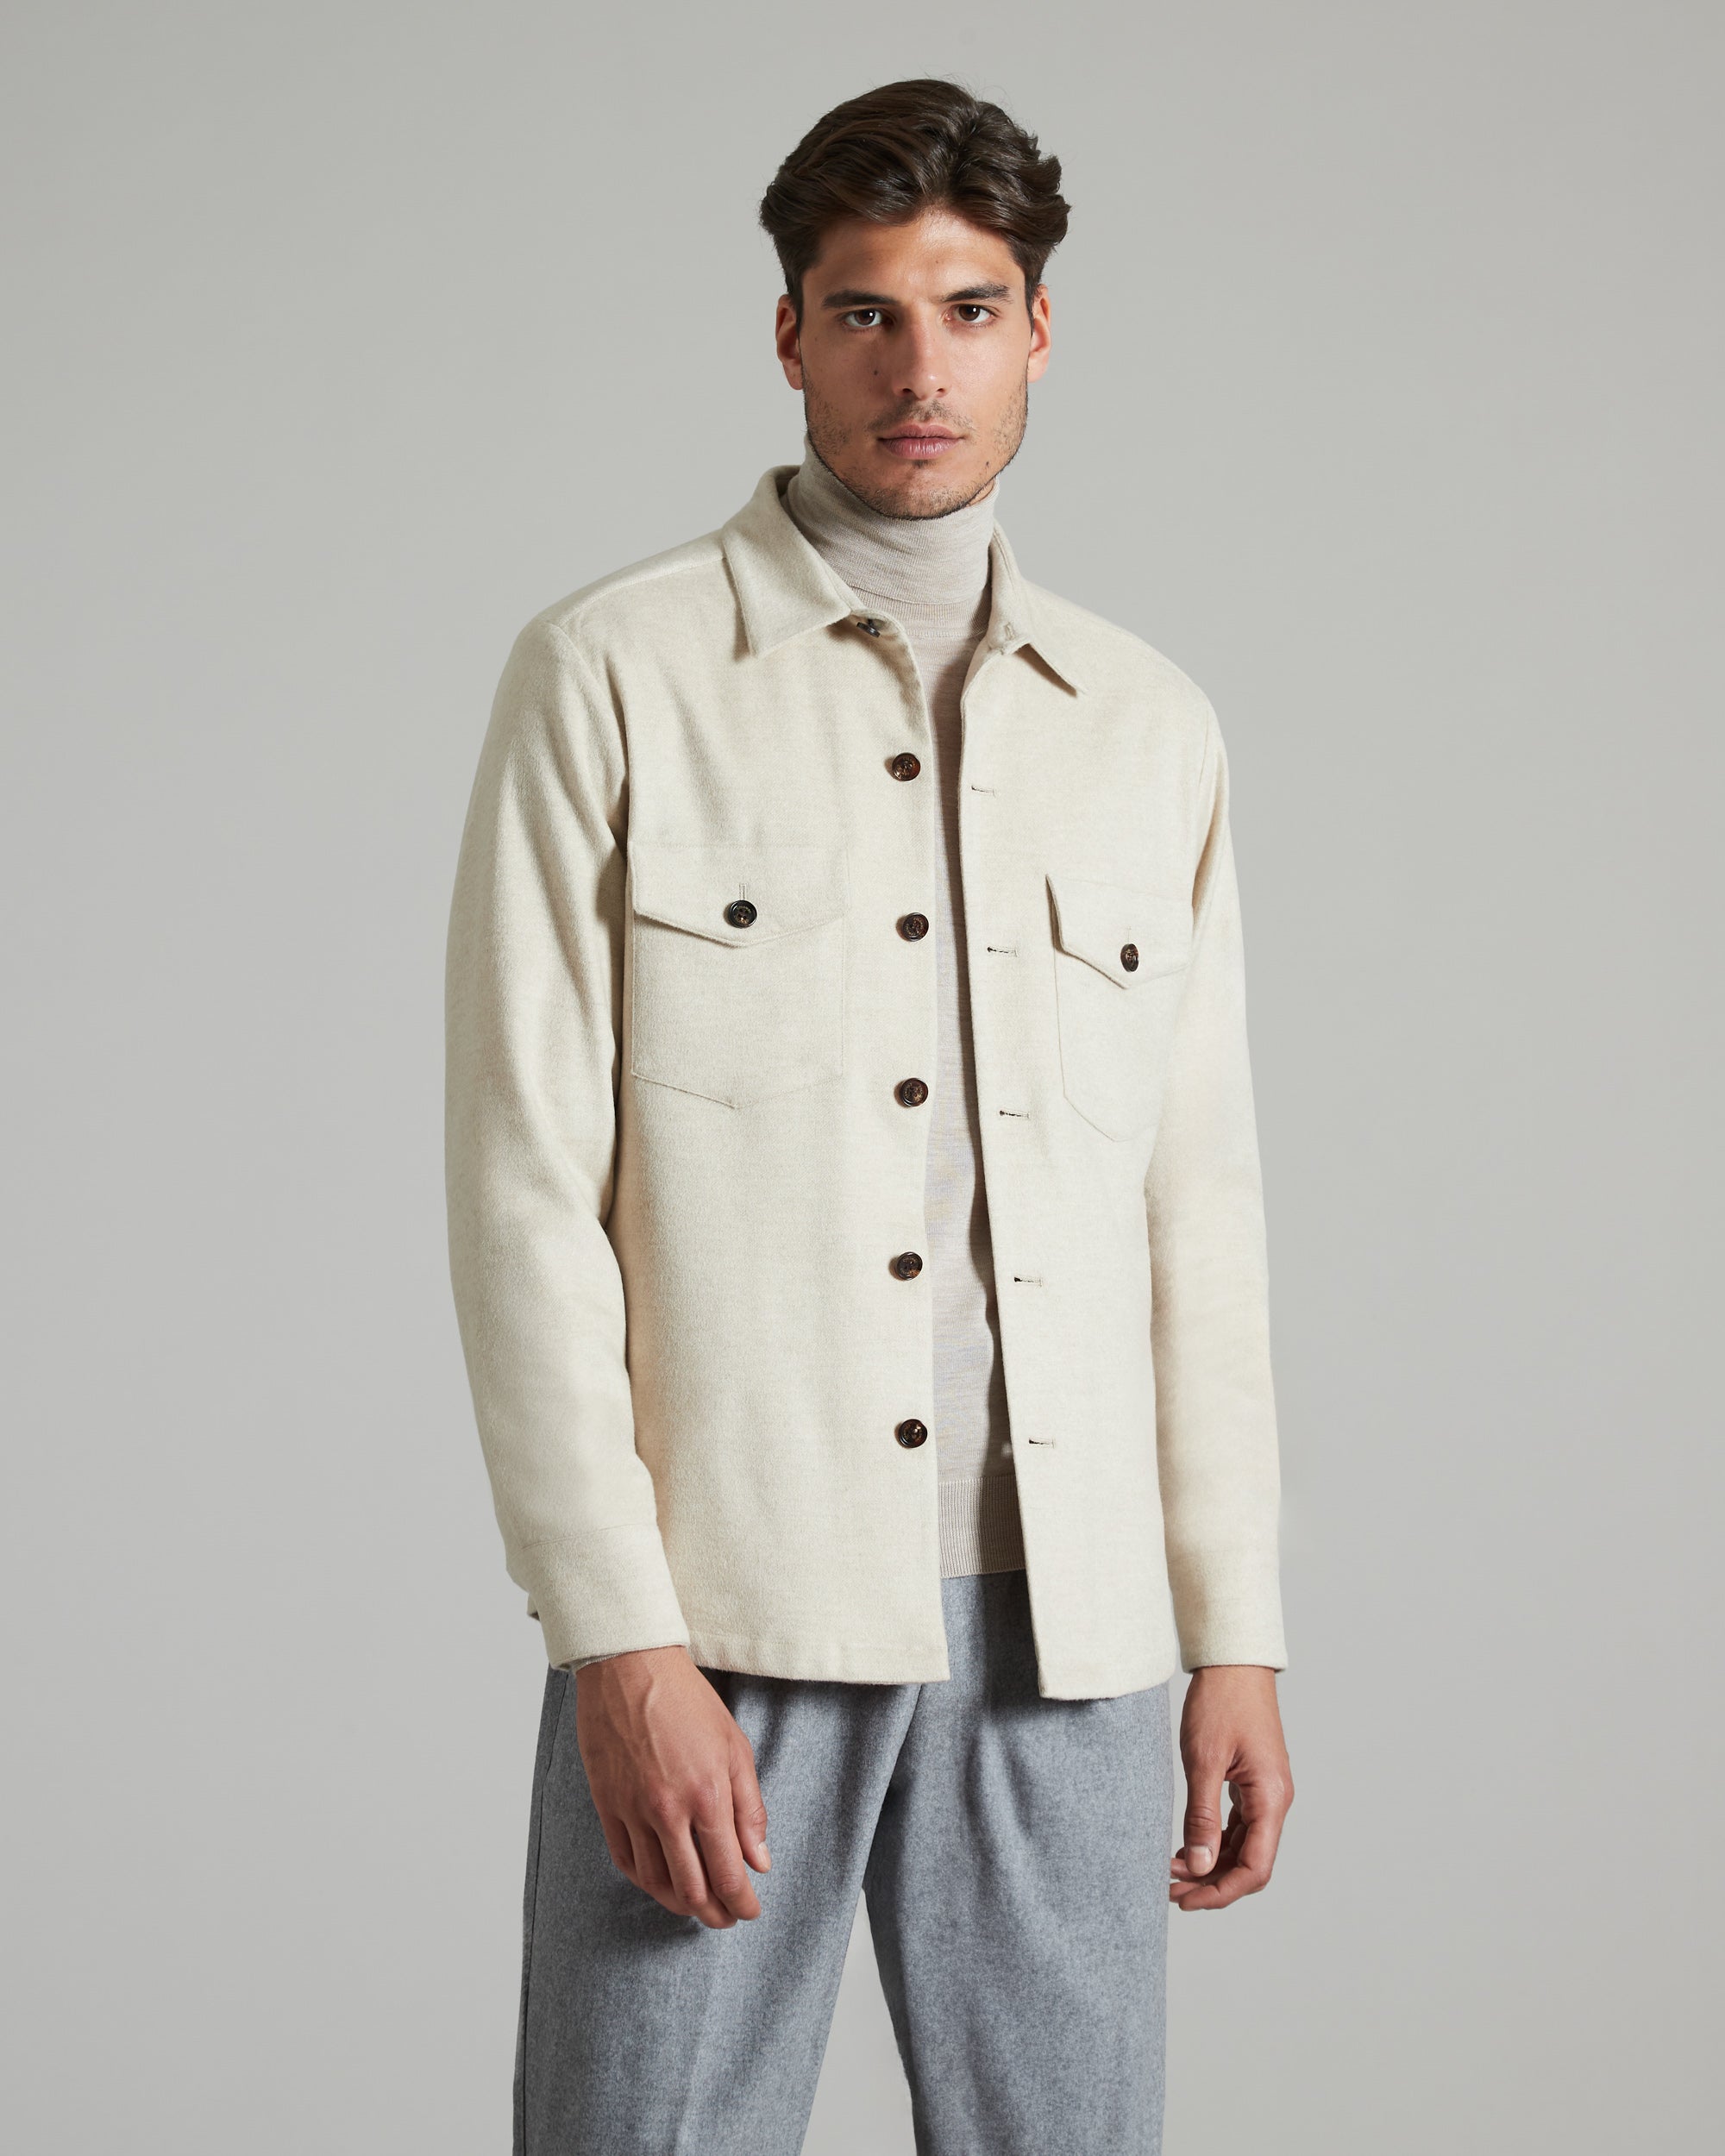 Reliance jacket in cashmere double